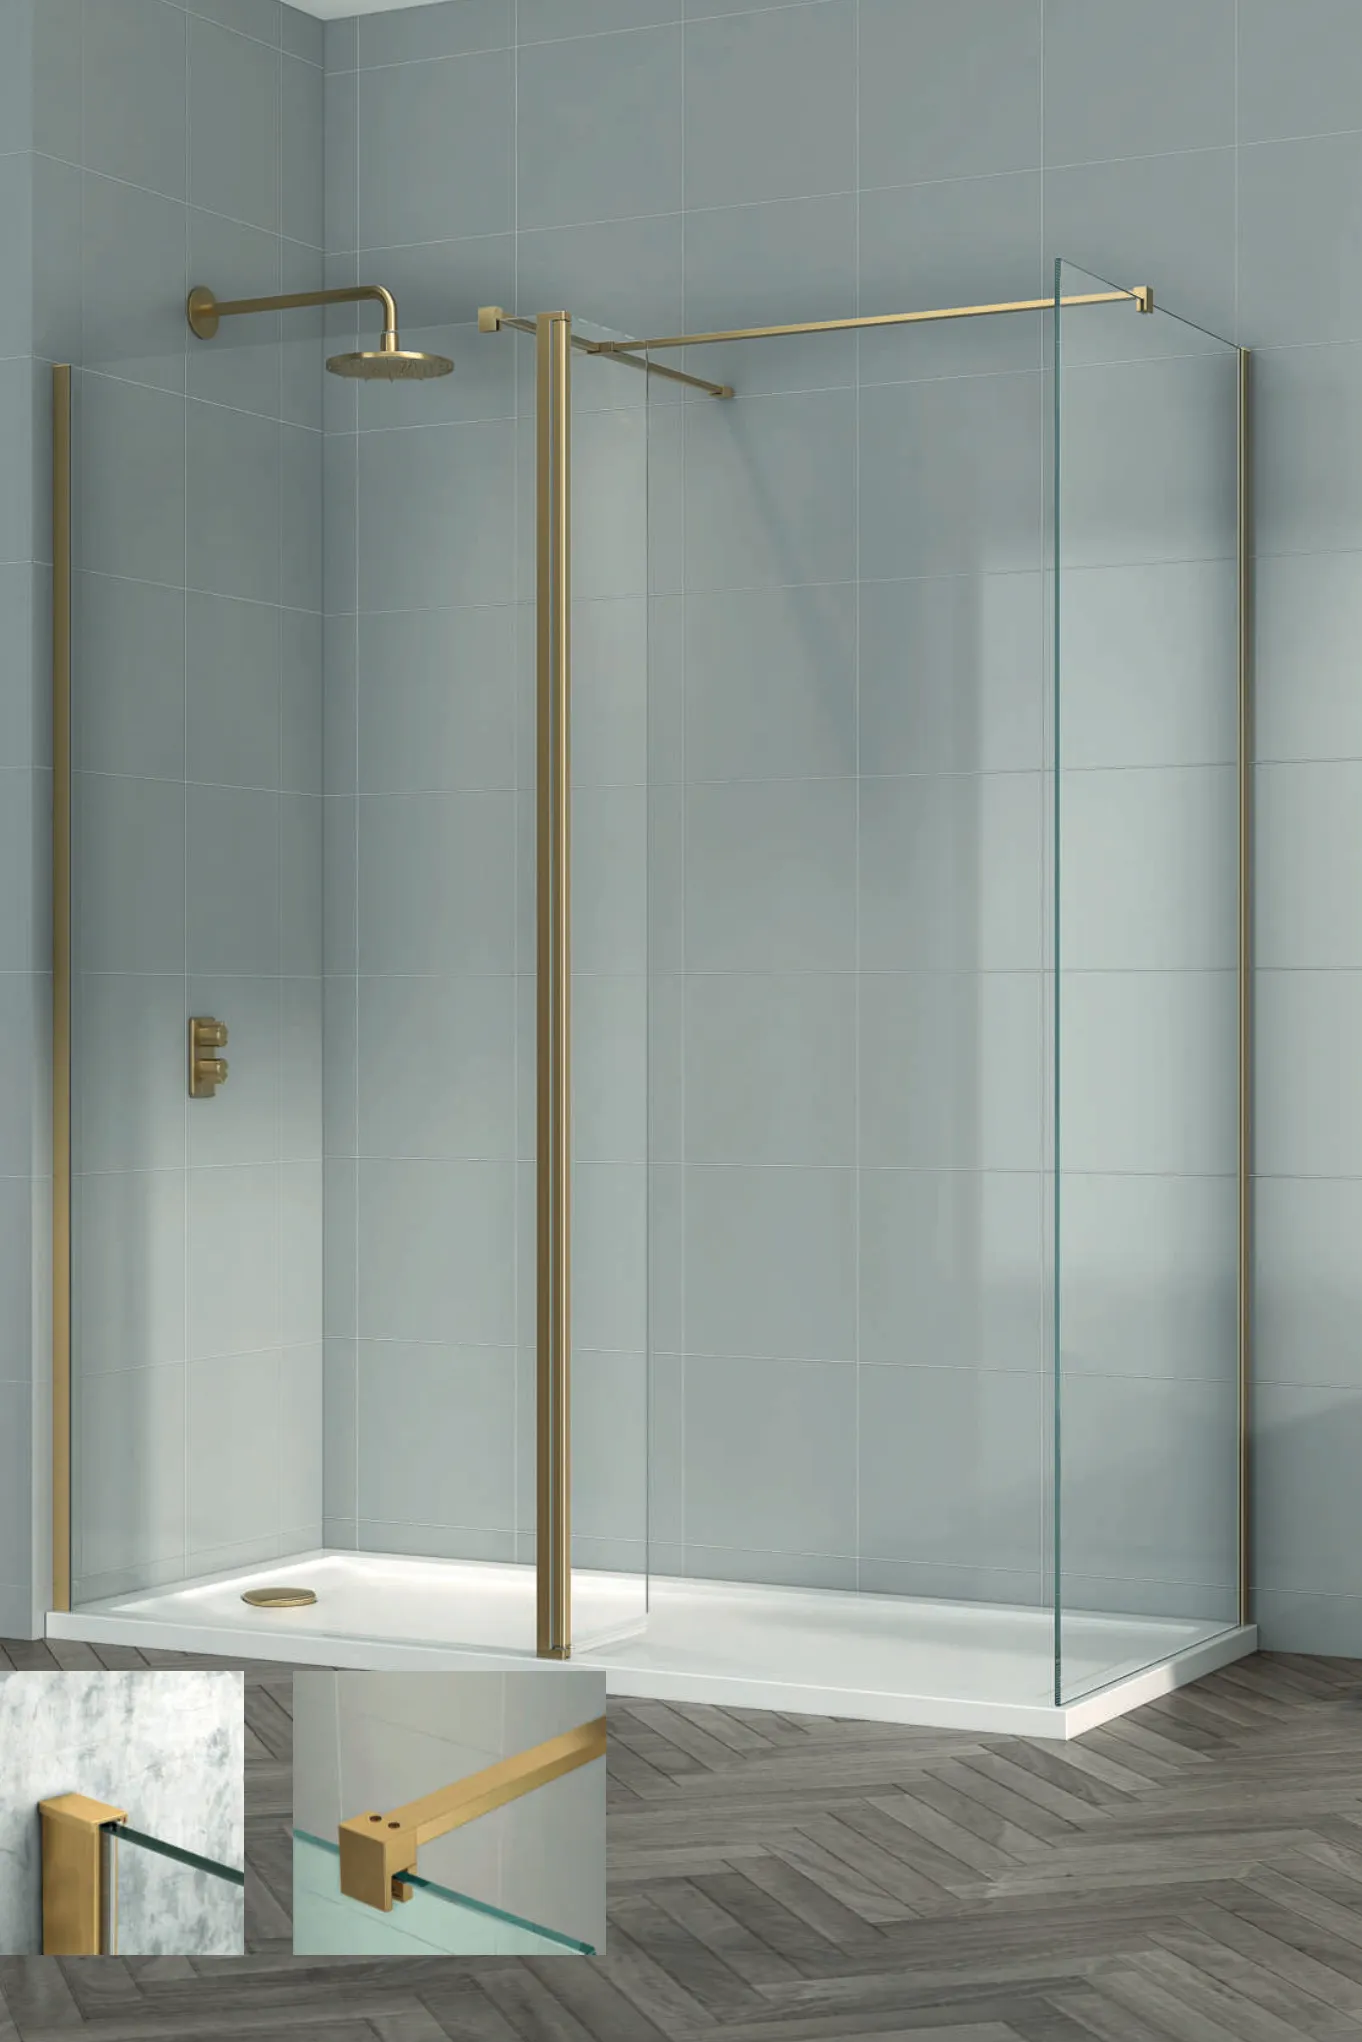 8mm Brushed Brass Wet-Room Panels - prices from £165.00